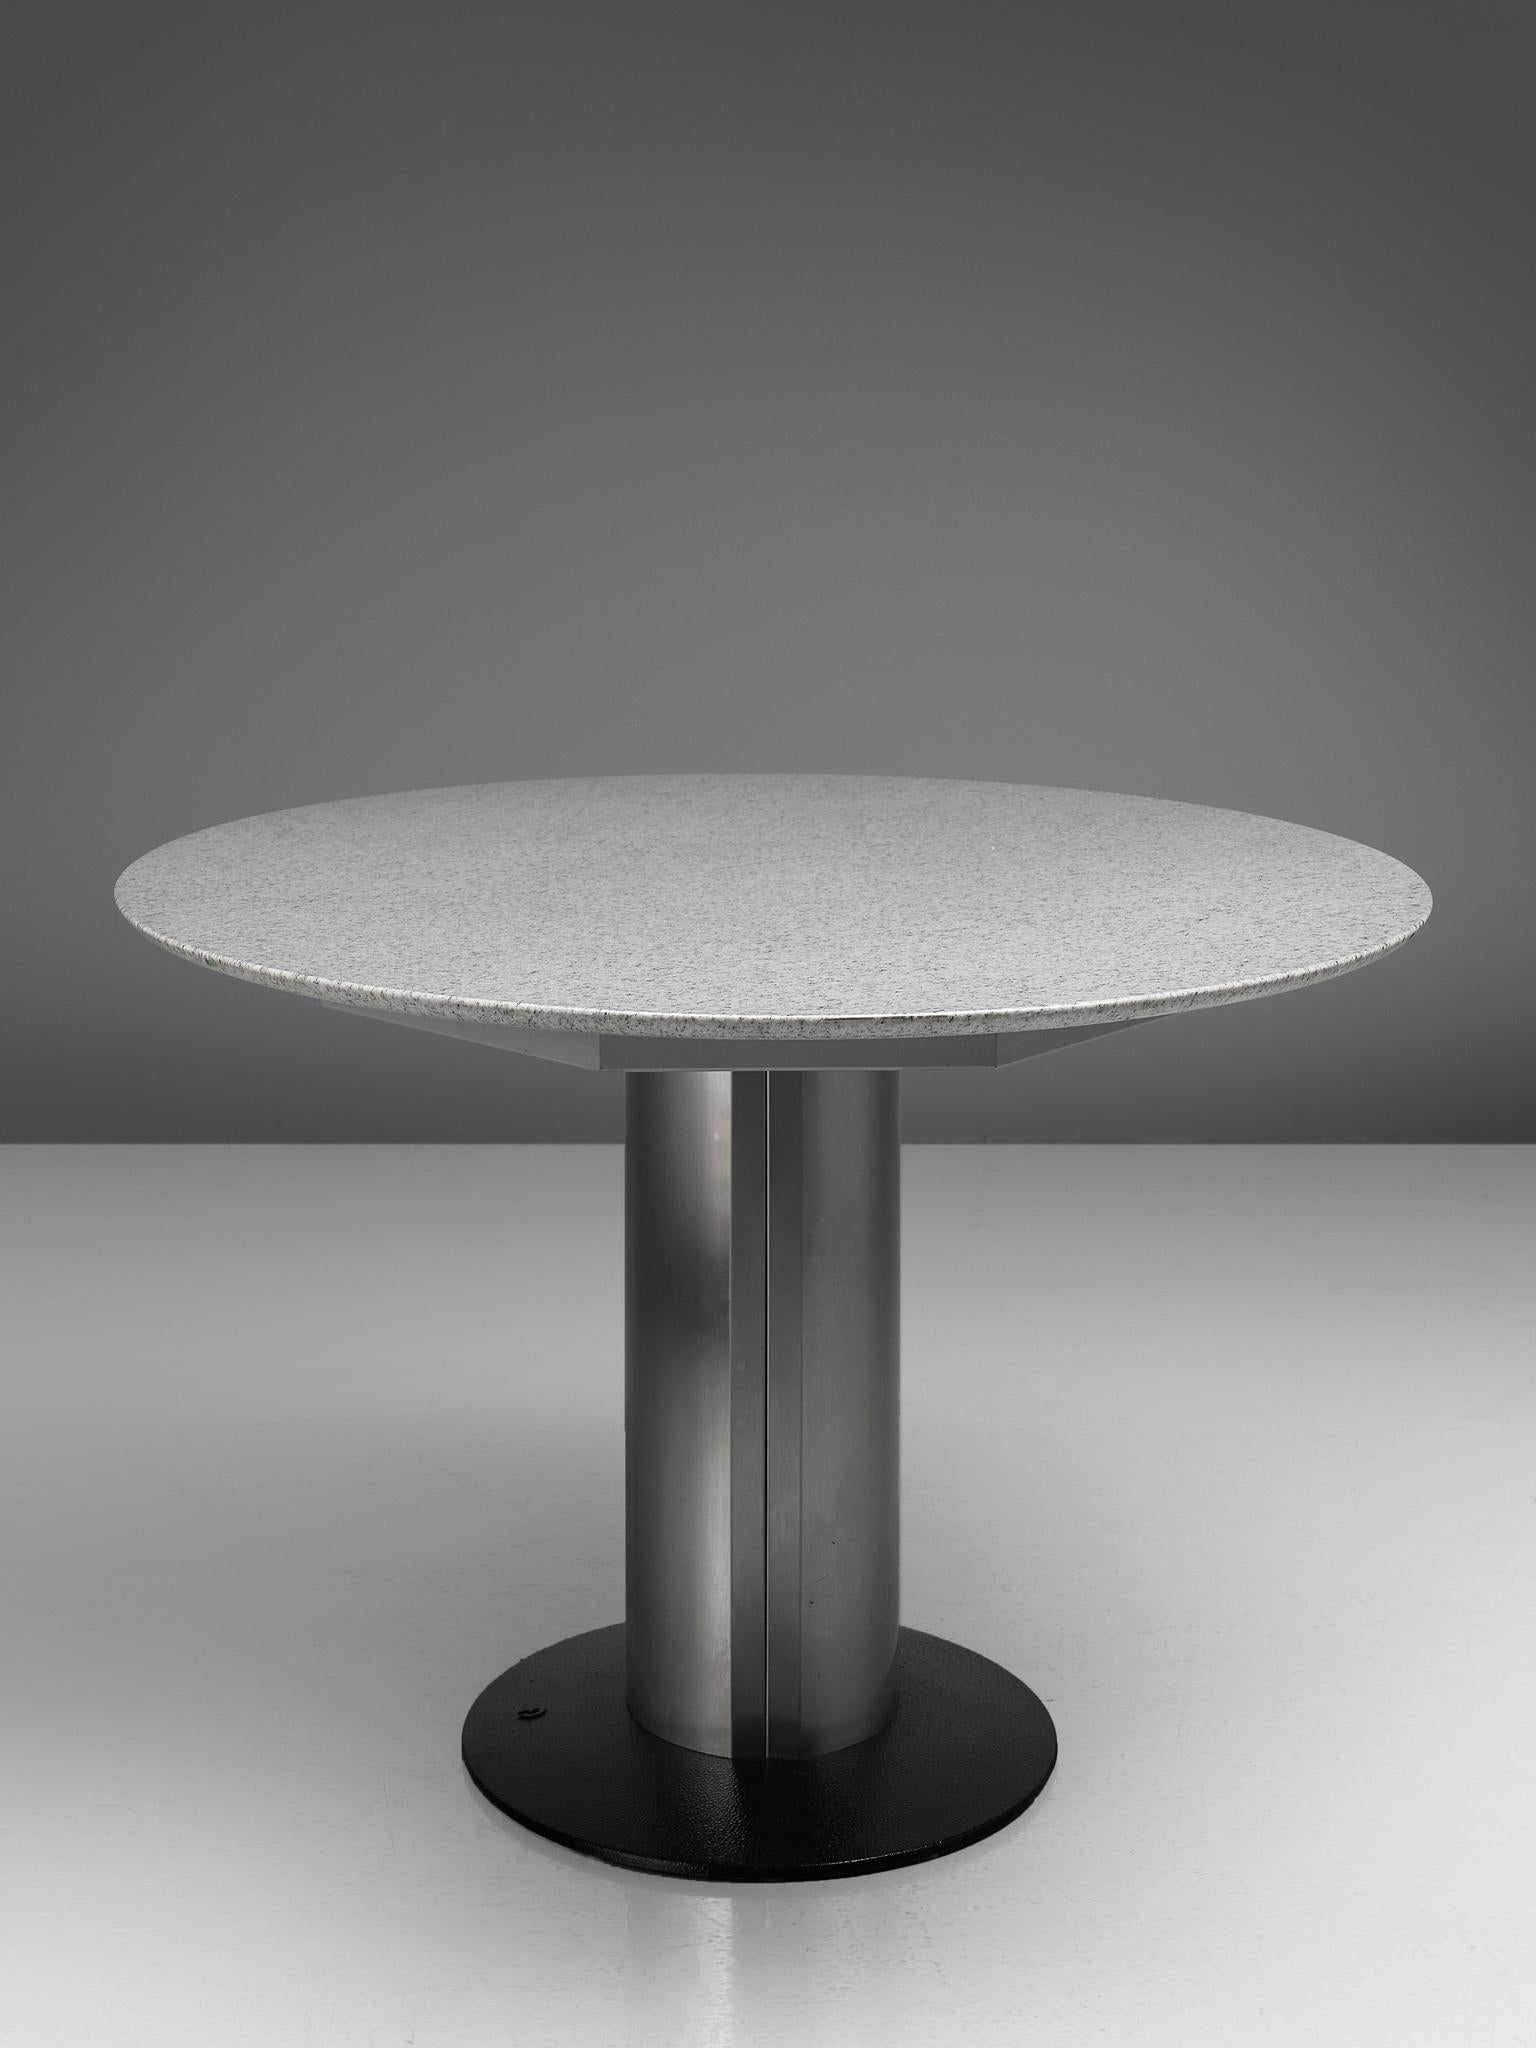 German Oval Pedestal Dining Table with White Granite Top